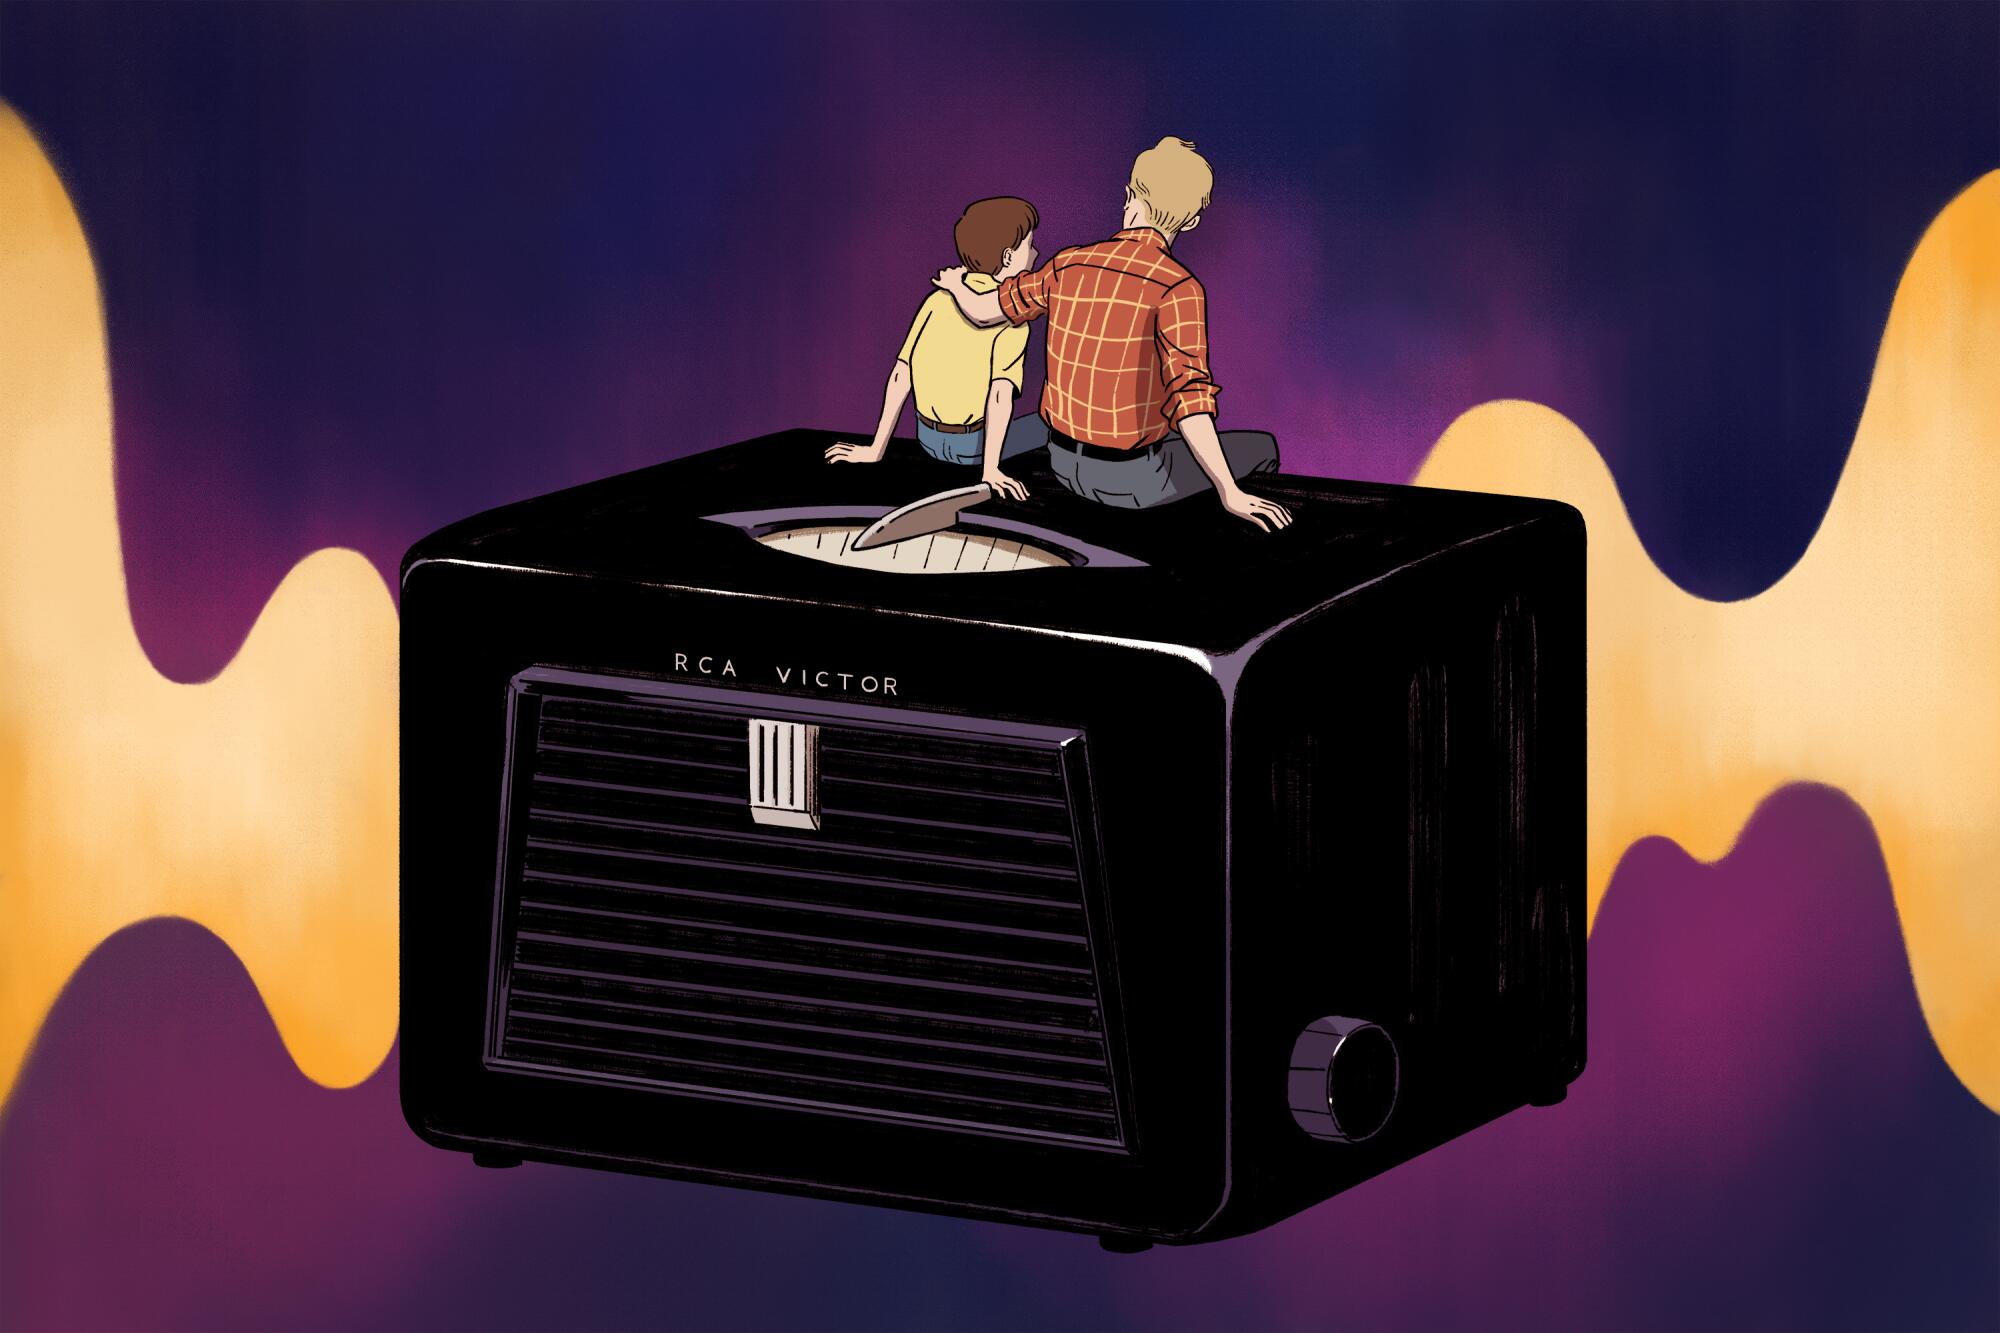 Illustration of a boy and father sitting atop an antique radio. Abstract soundwaves are in the background